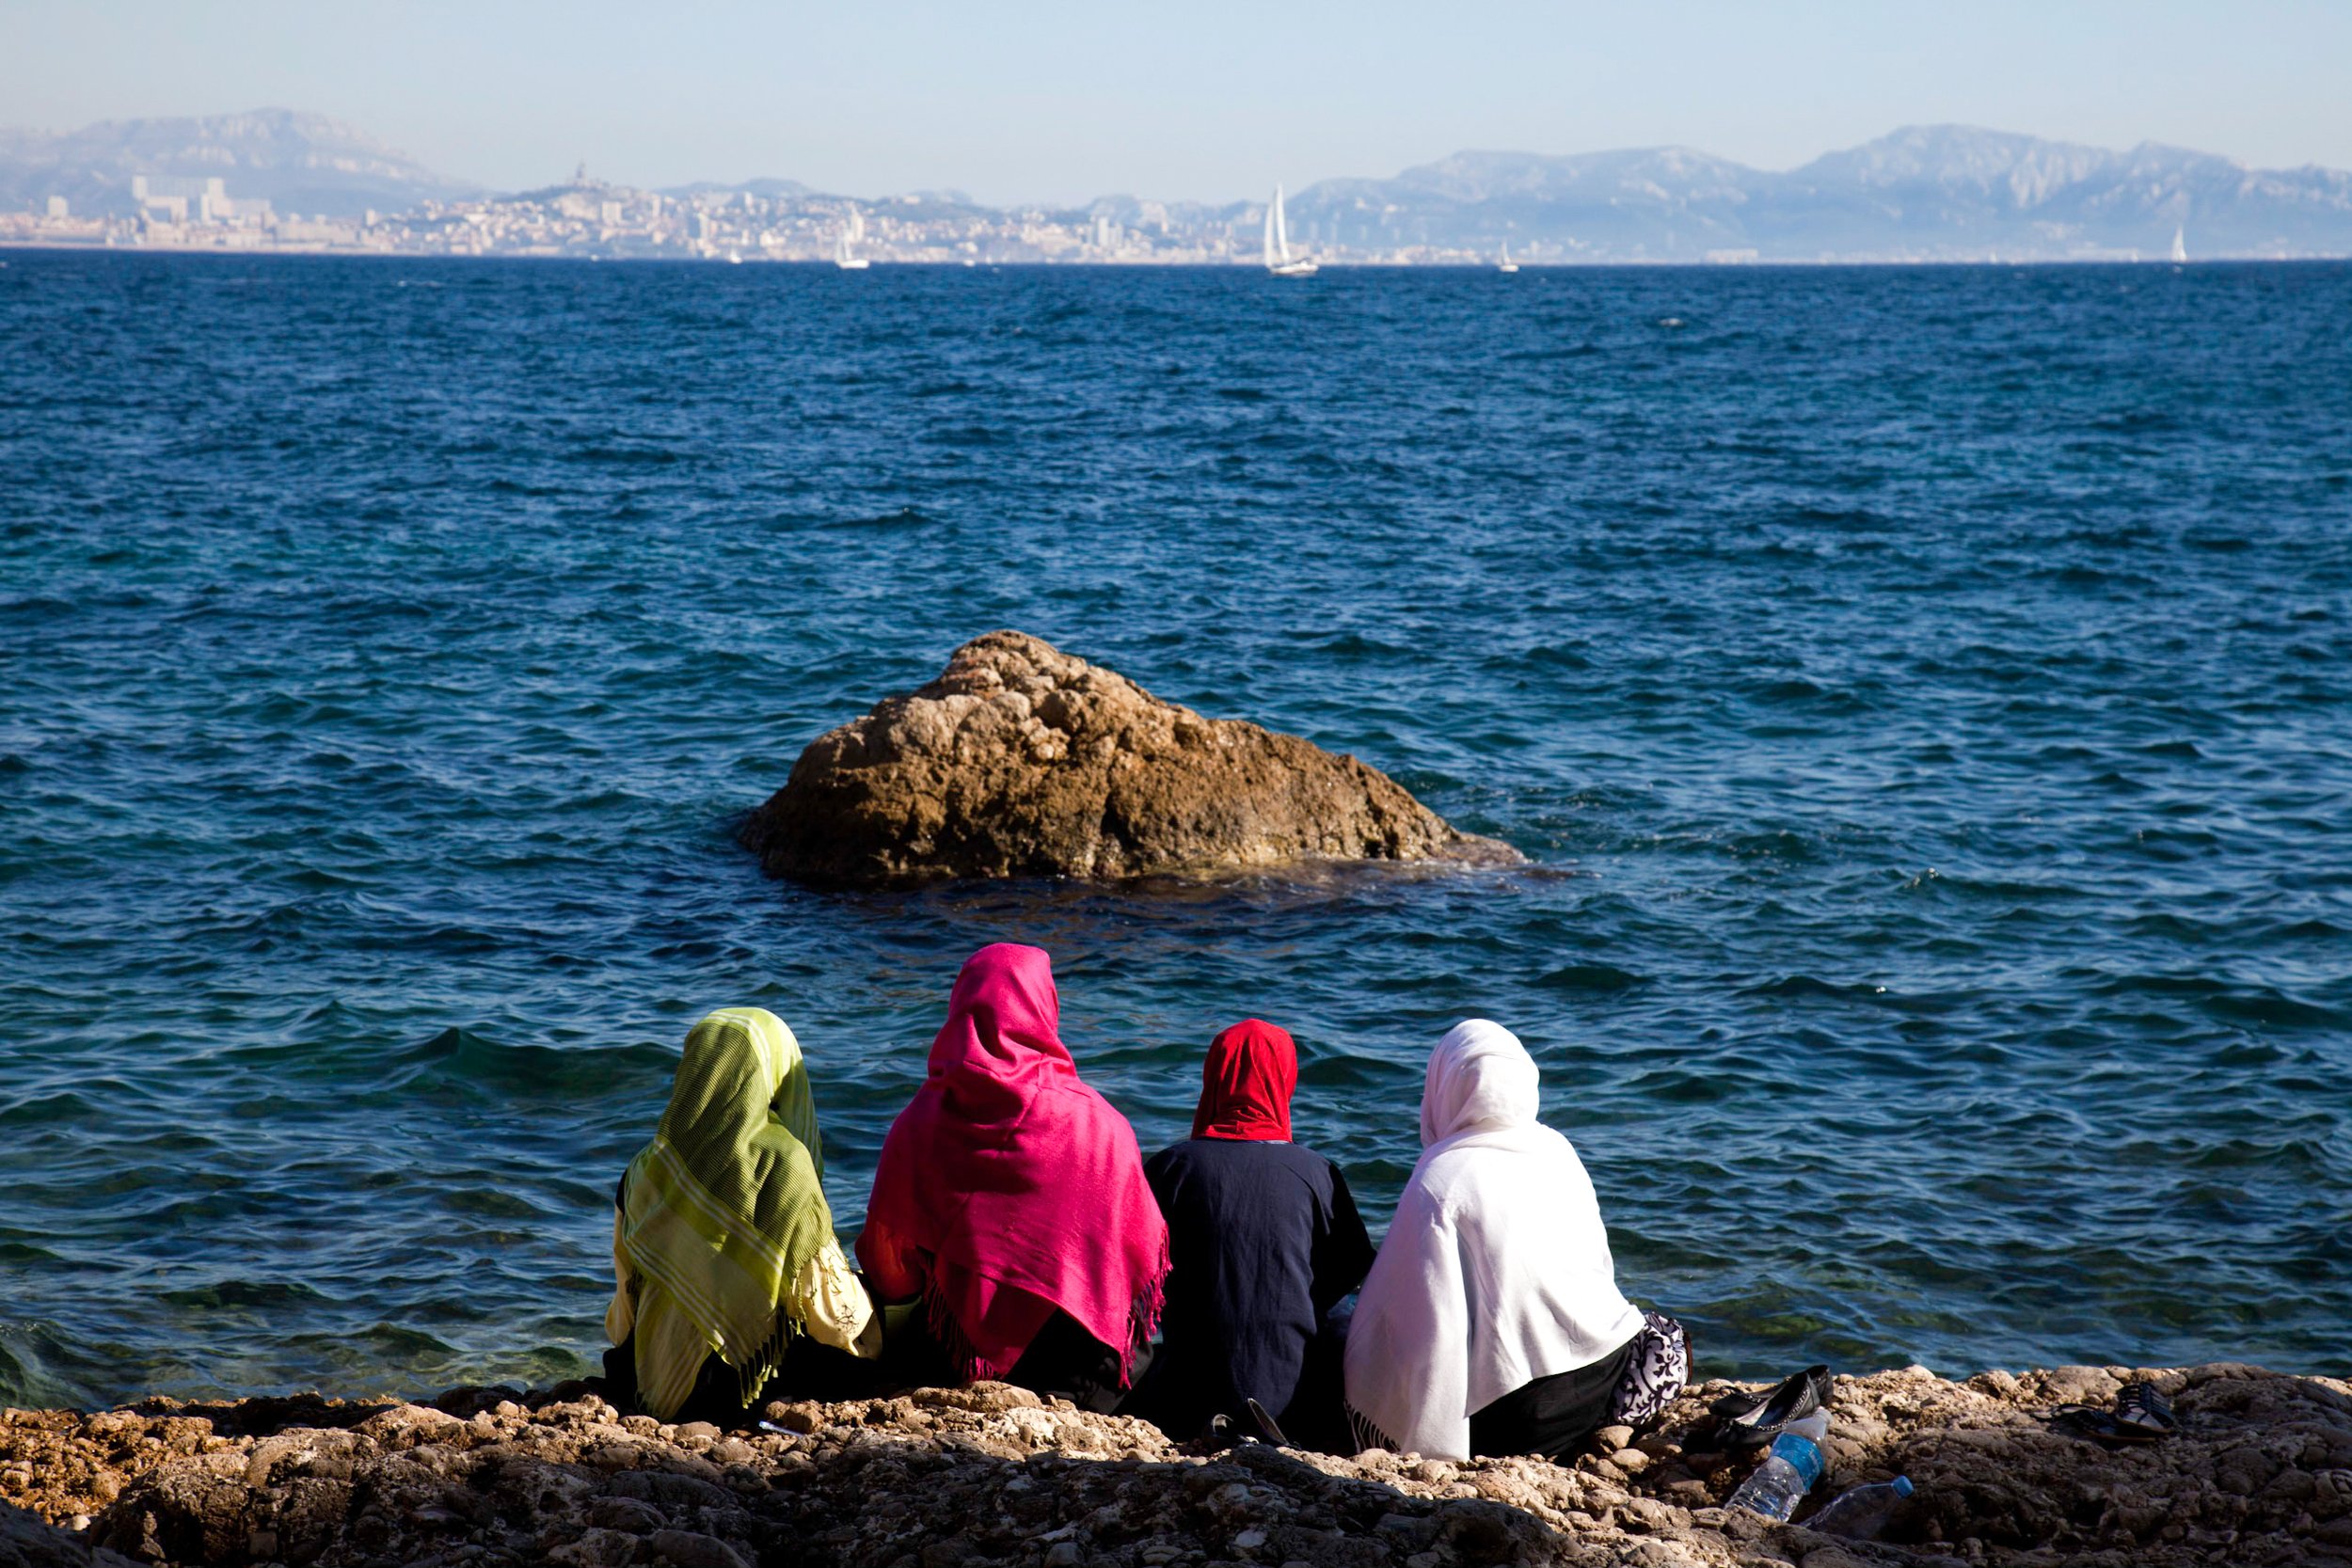  Locals enjoy the scenic Corbieres Beach in Lestaque, Marseille, France on Sept. 12, 2010. 